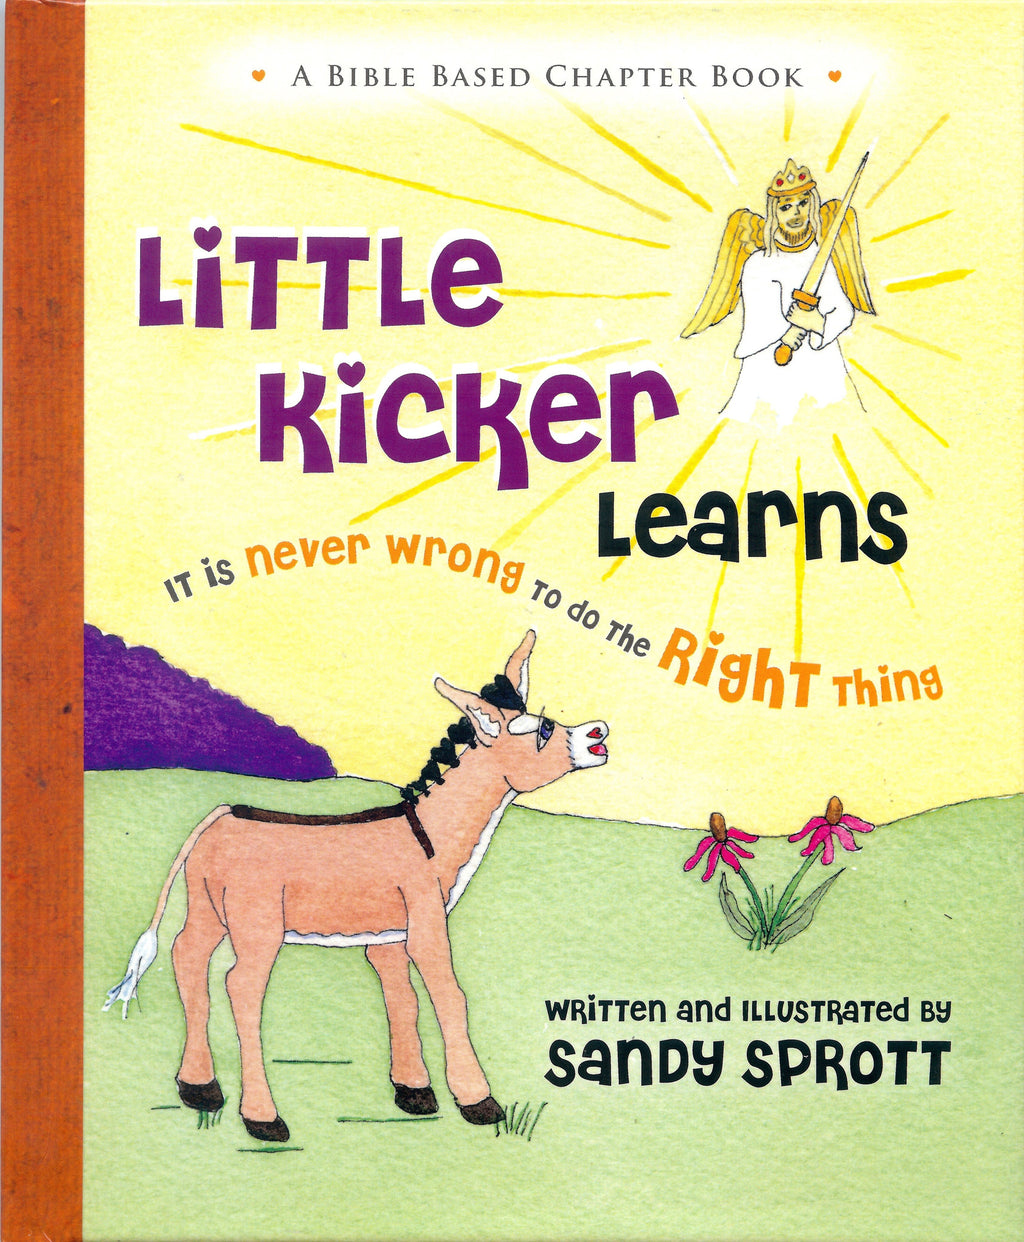 Little Kicker Learns it is Never Wrong to do the Right Thing